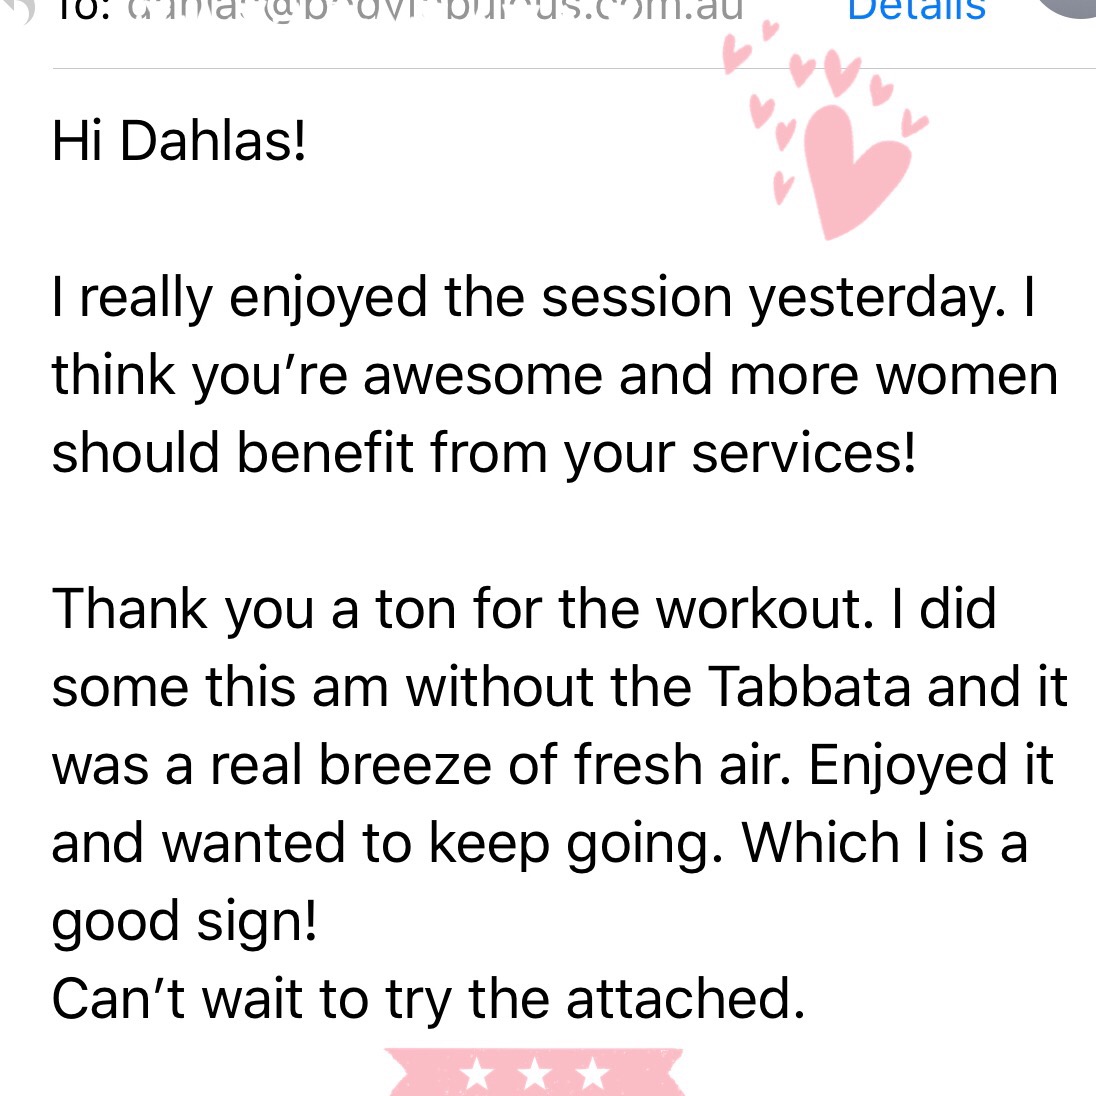 TRAIN WITH DAHLAS